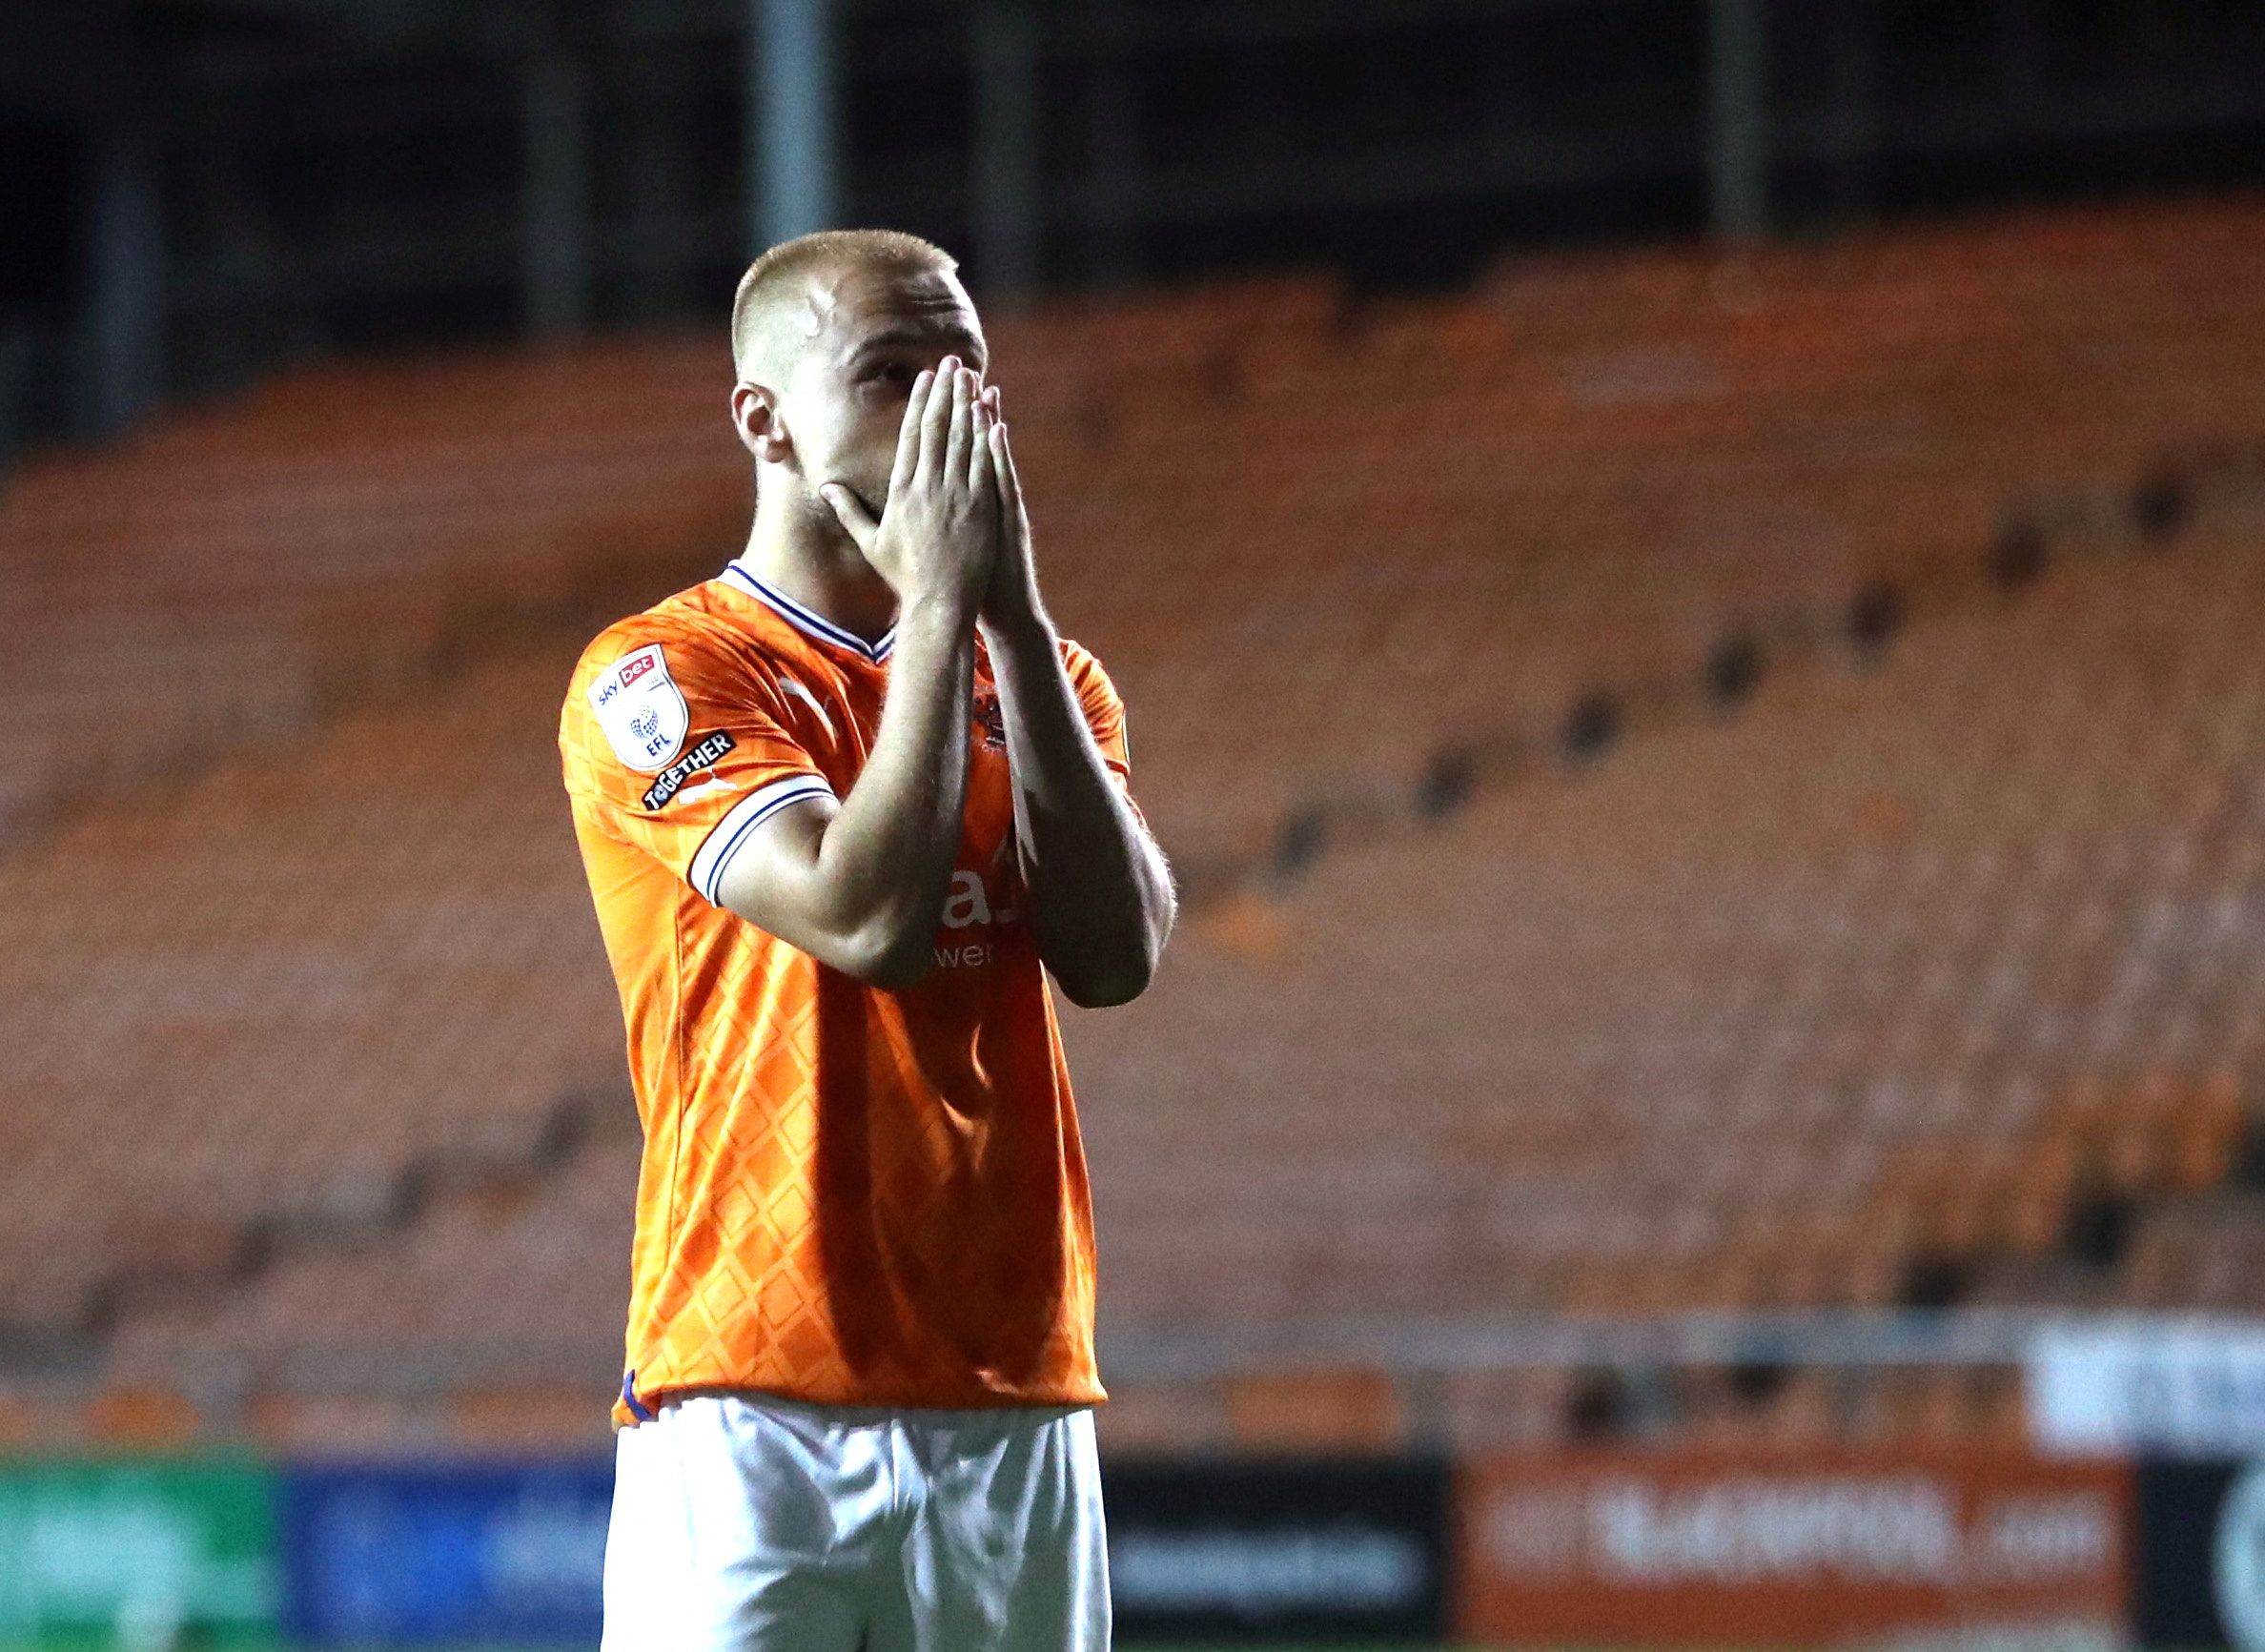 Soccer Football - Carabao Cup - Blackpool v Barrow - Bloomfield Road, Blackpool, Britain - August 9, 2022  Blackpool's Lewis Fiorini reacts after he misses a penalty during the shoot out Action Images/Molly Darlington  EDITORIAL USE ONLY. No use with unauthorized audio, video, data, fixture lists, club/league logos or 